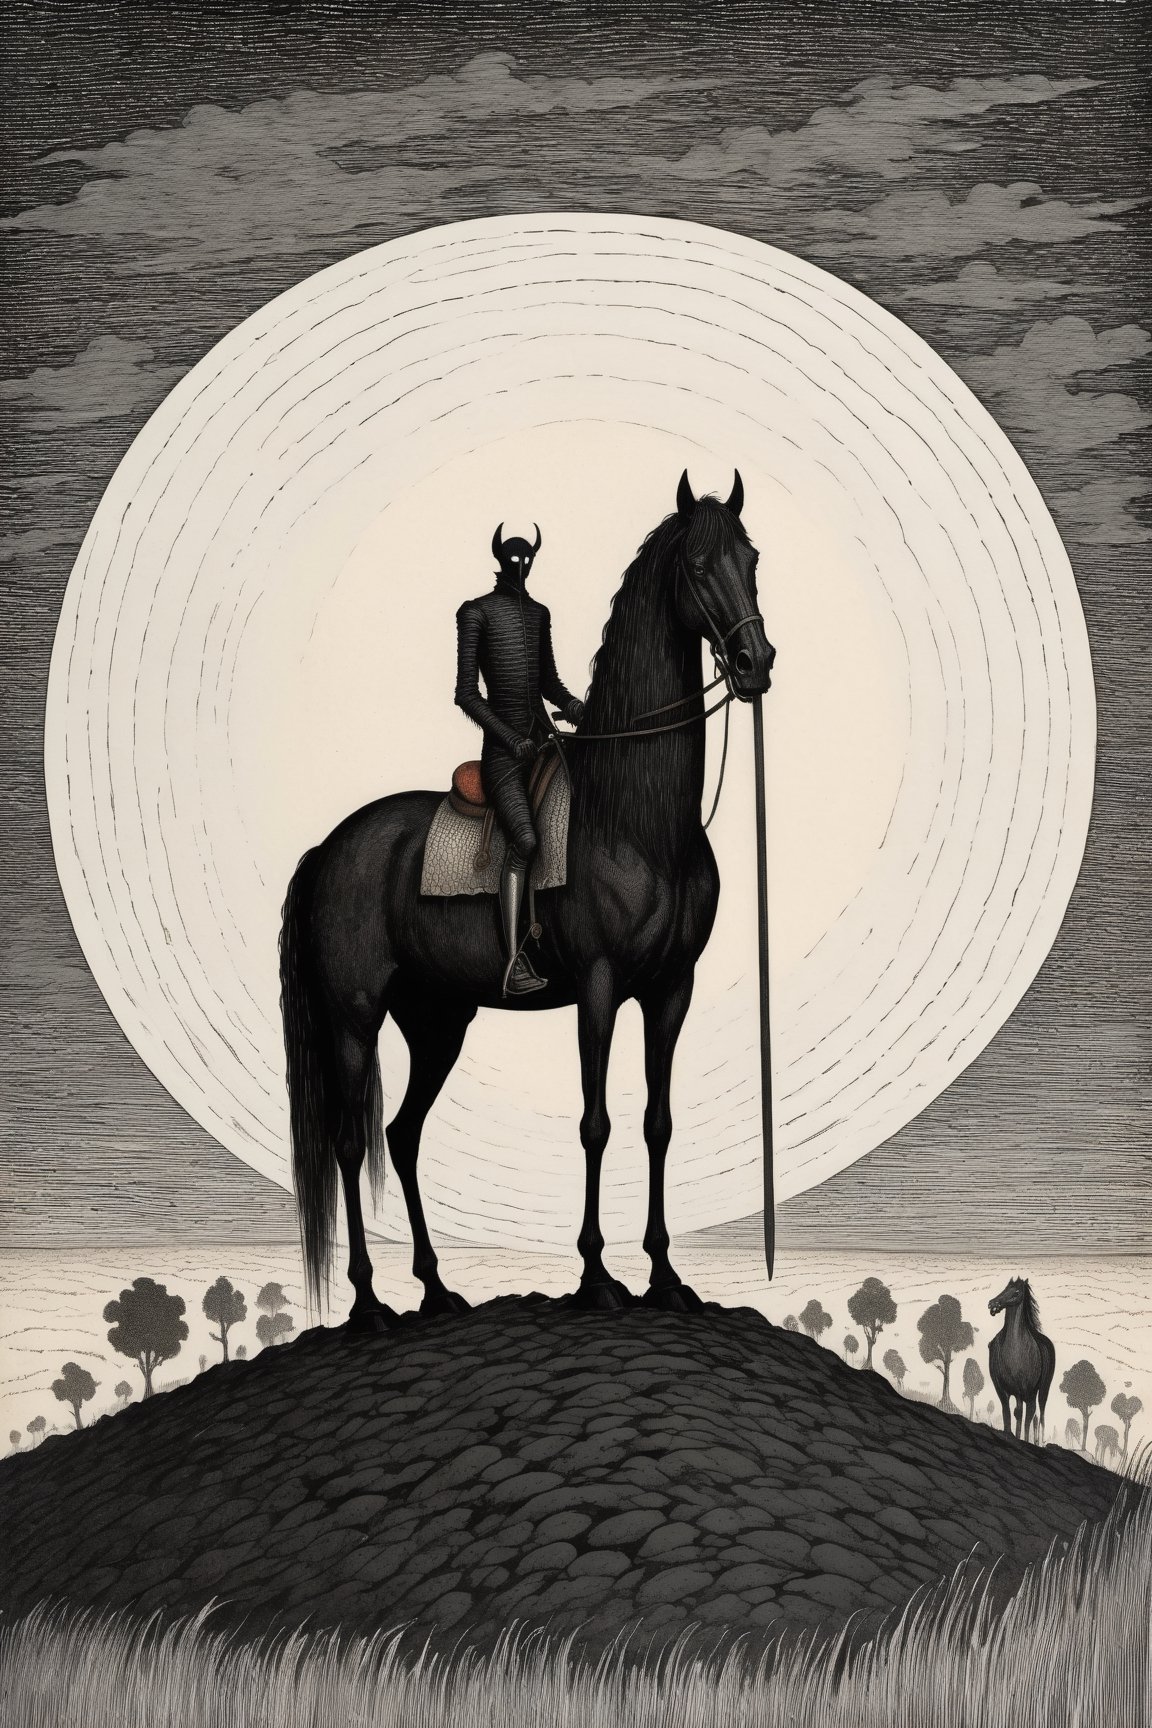 The third rider of the Apocalypse, an emaciated and thin figure, atop a menacing black horse, manifests famine and scarcity. (((With scales in hand:1.3))) casting a desolate shadow of struggle across the land. in the style of Edward Gorey. Edward Gorey Style page